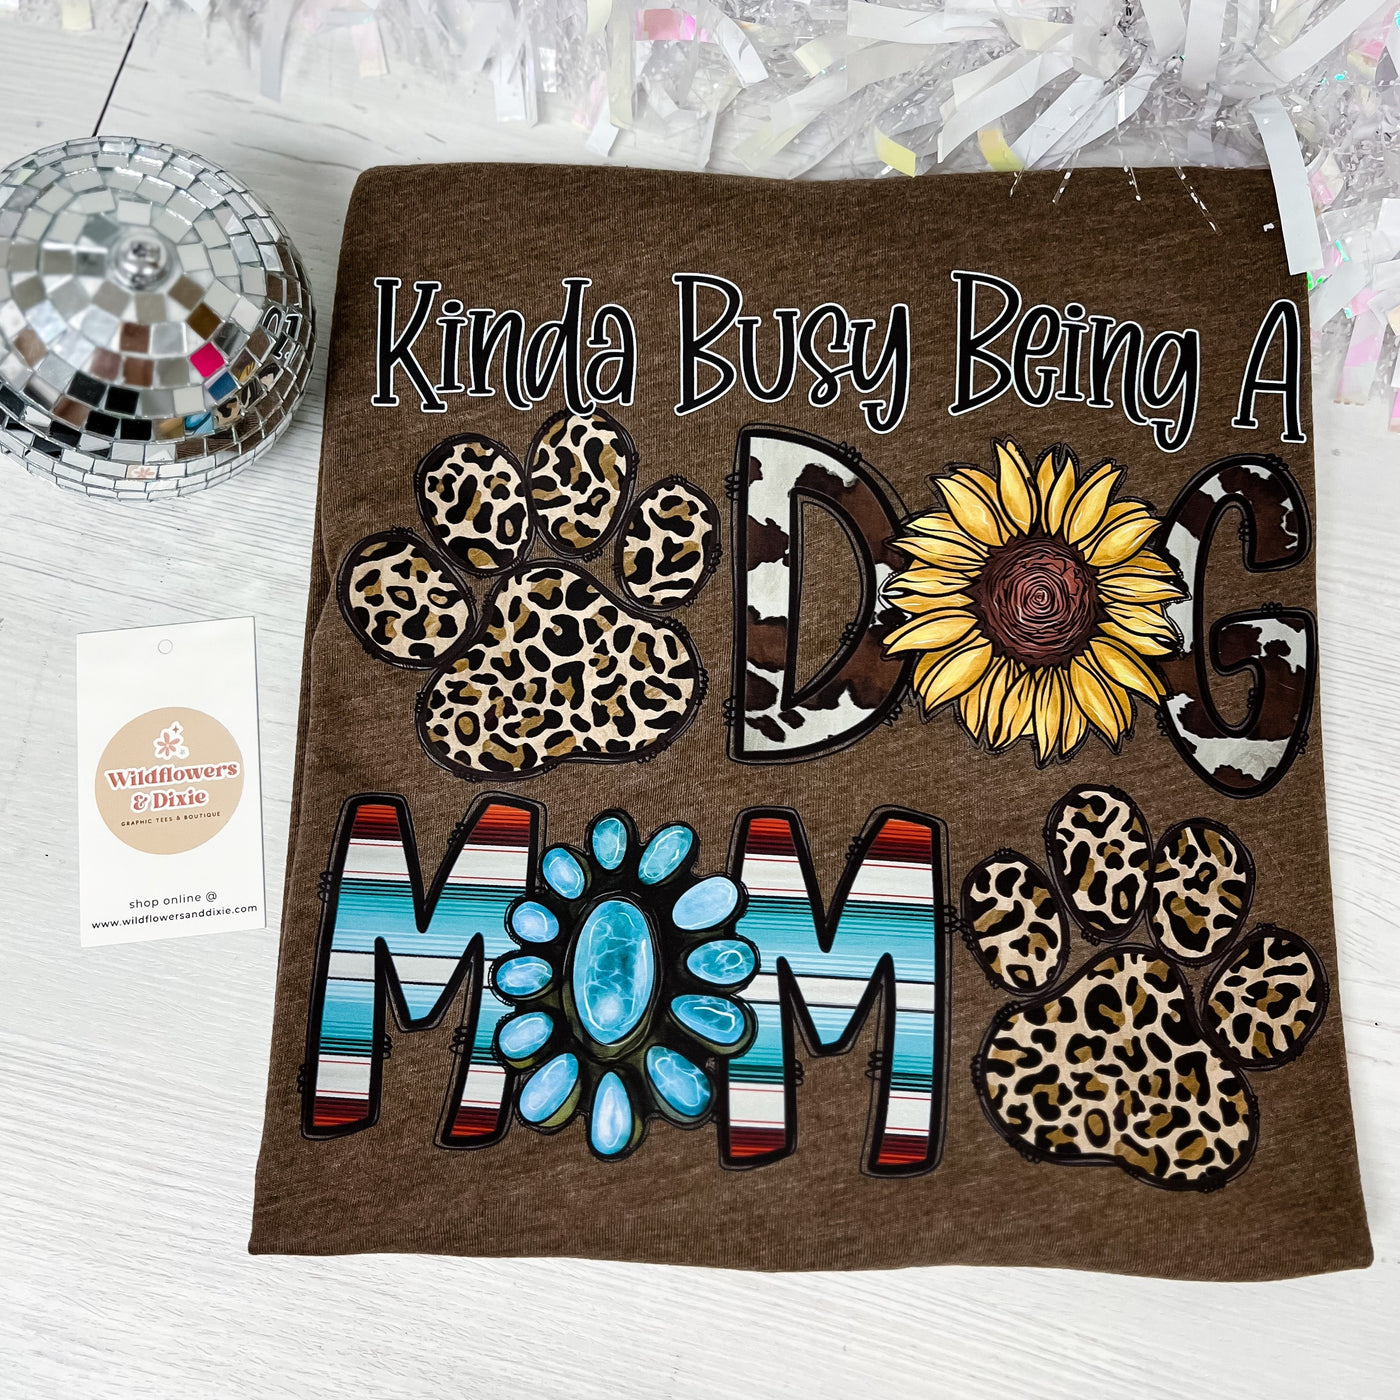 Kinda Busy Being a Dog Mom graphic t-shirt with leopard and cow print font, sunflowers, and other country/western elements